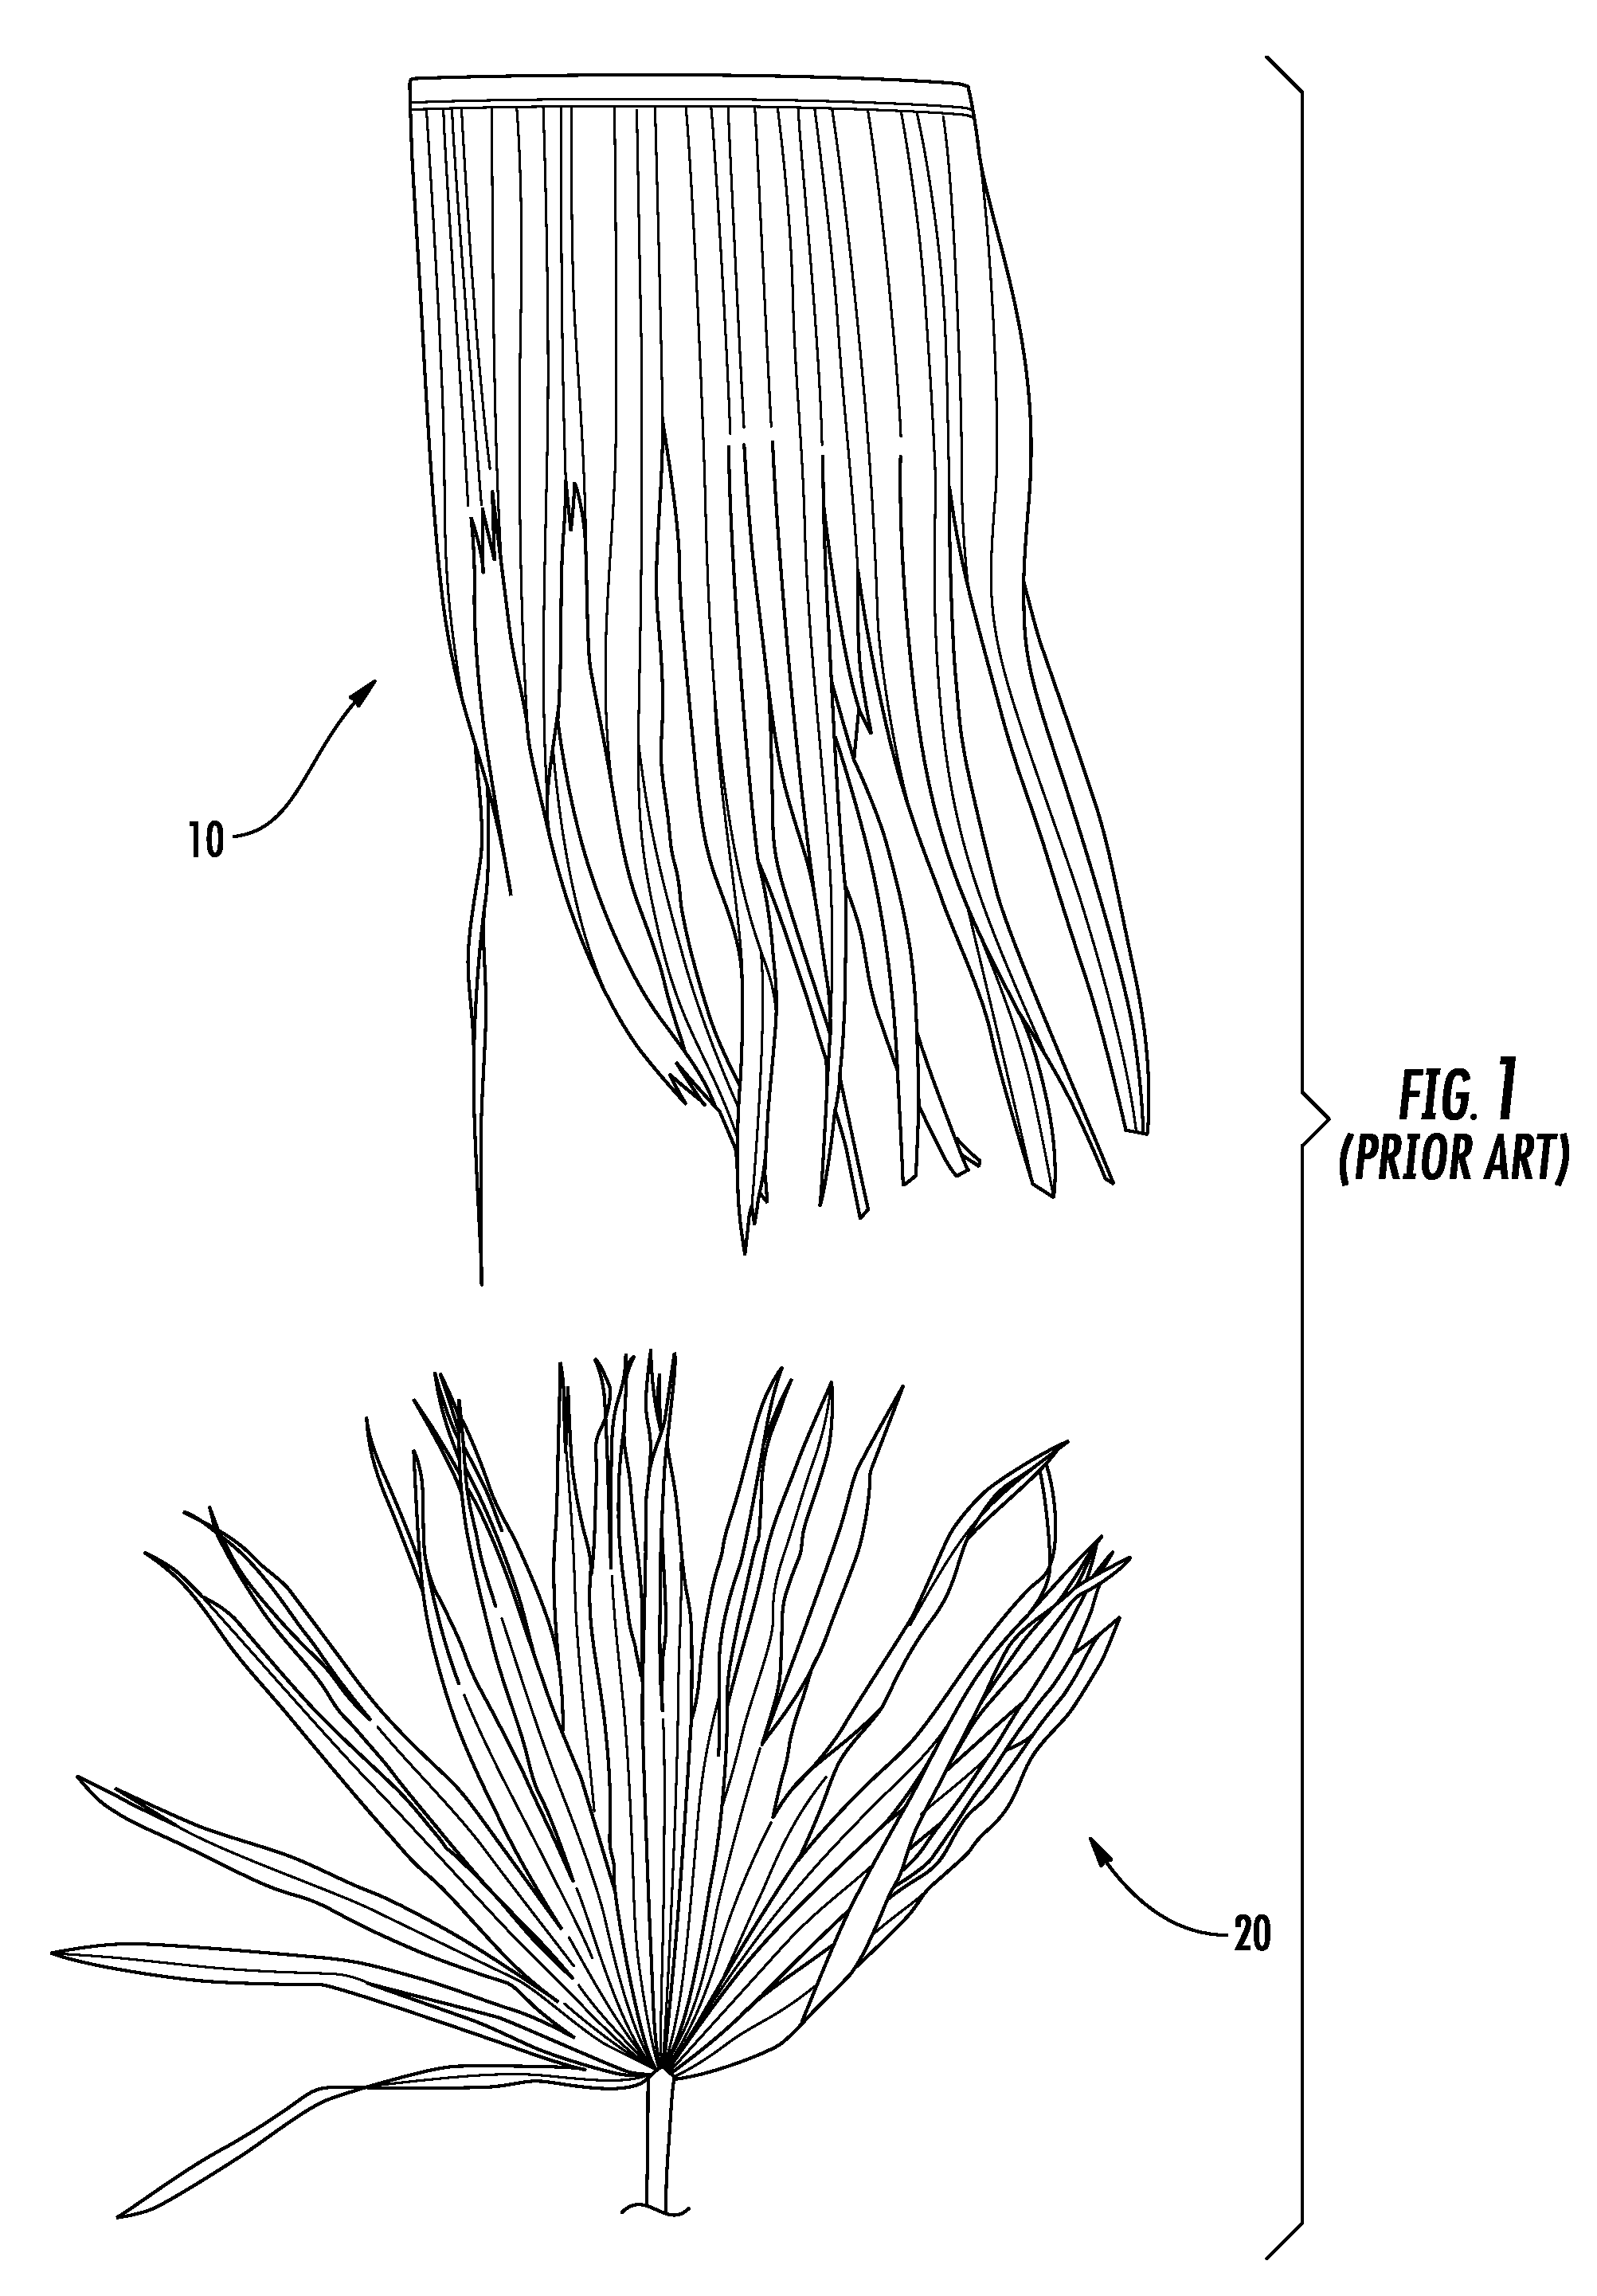 Synthetic thatch members for use as roofing material products and methods of making and using the same